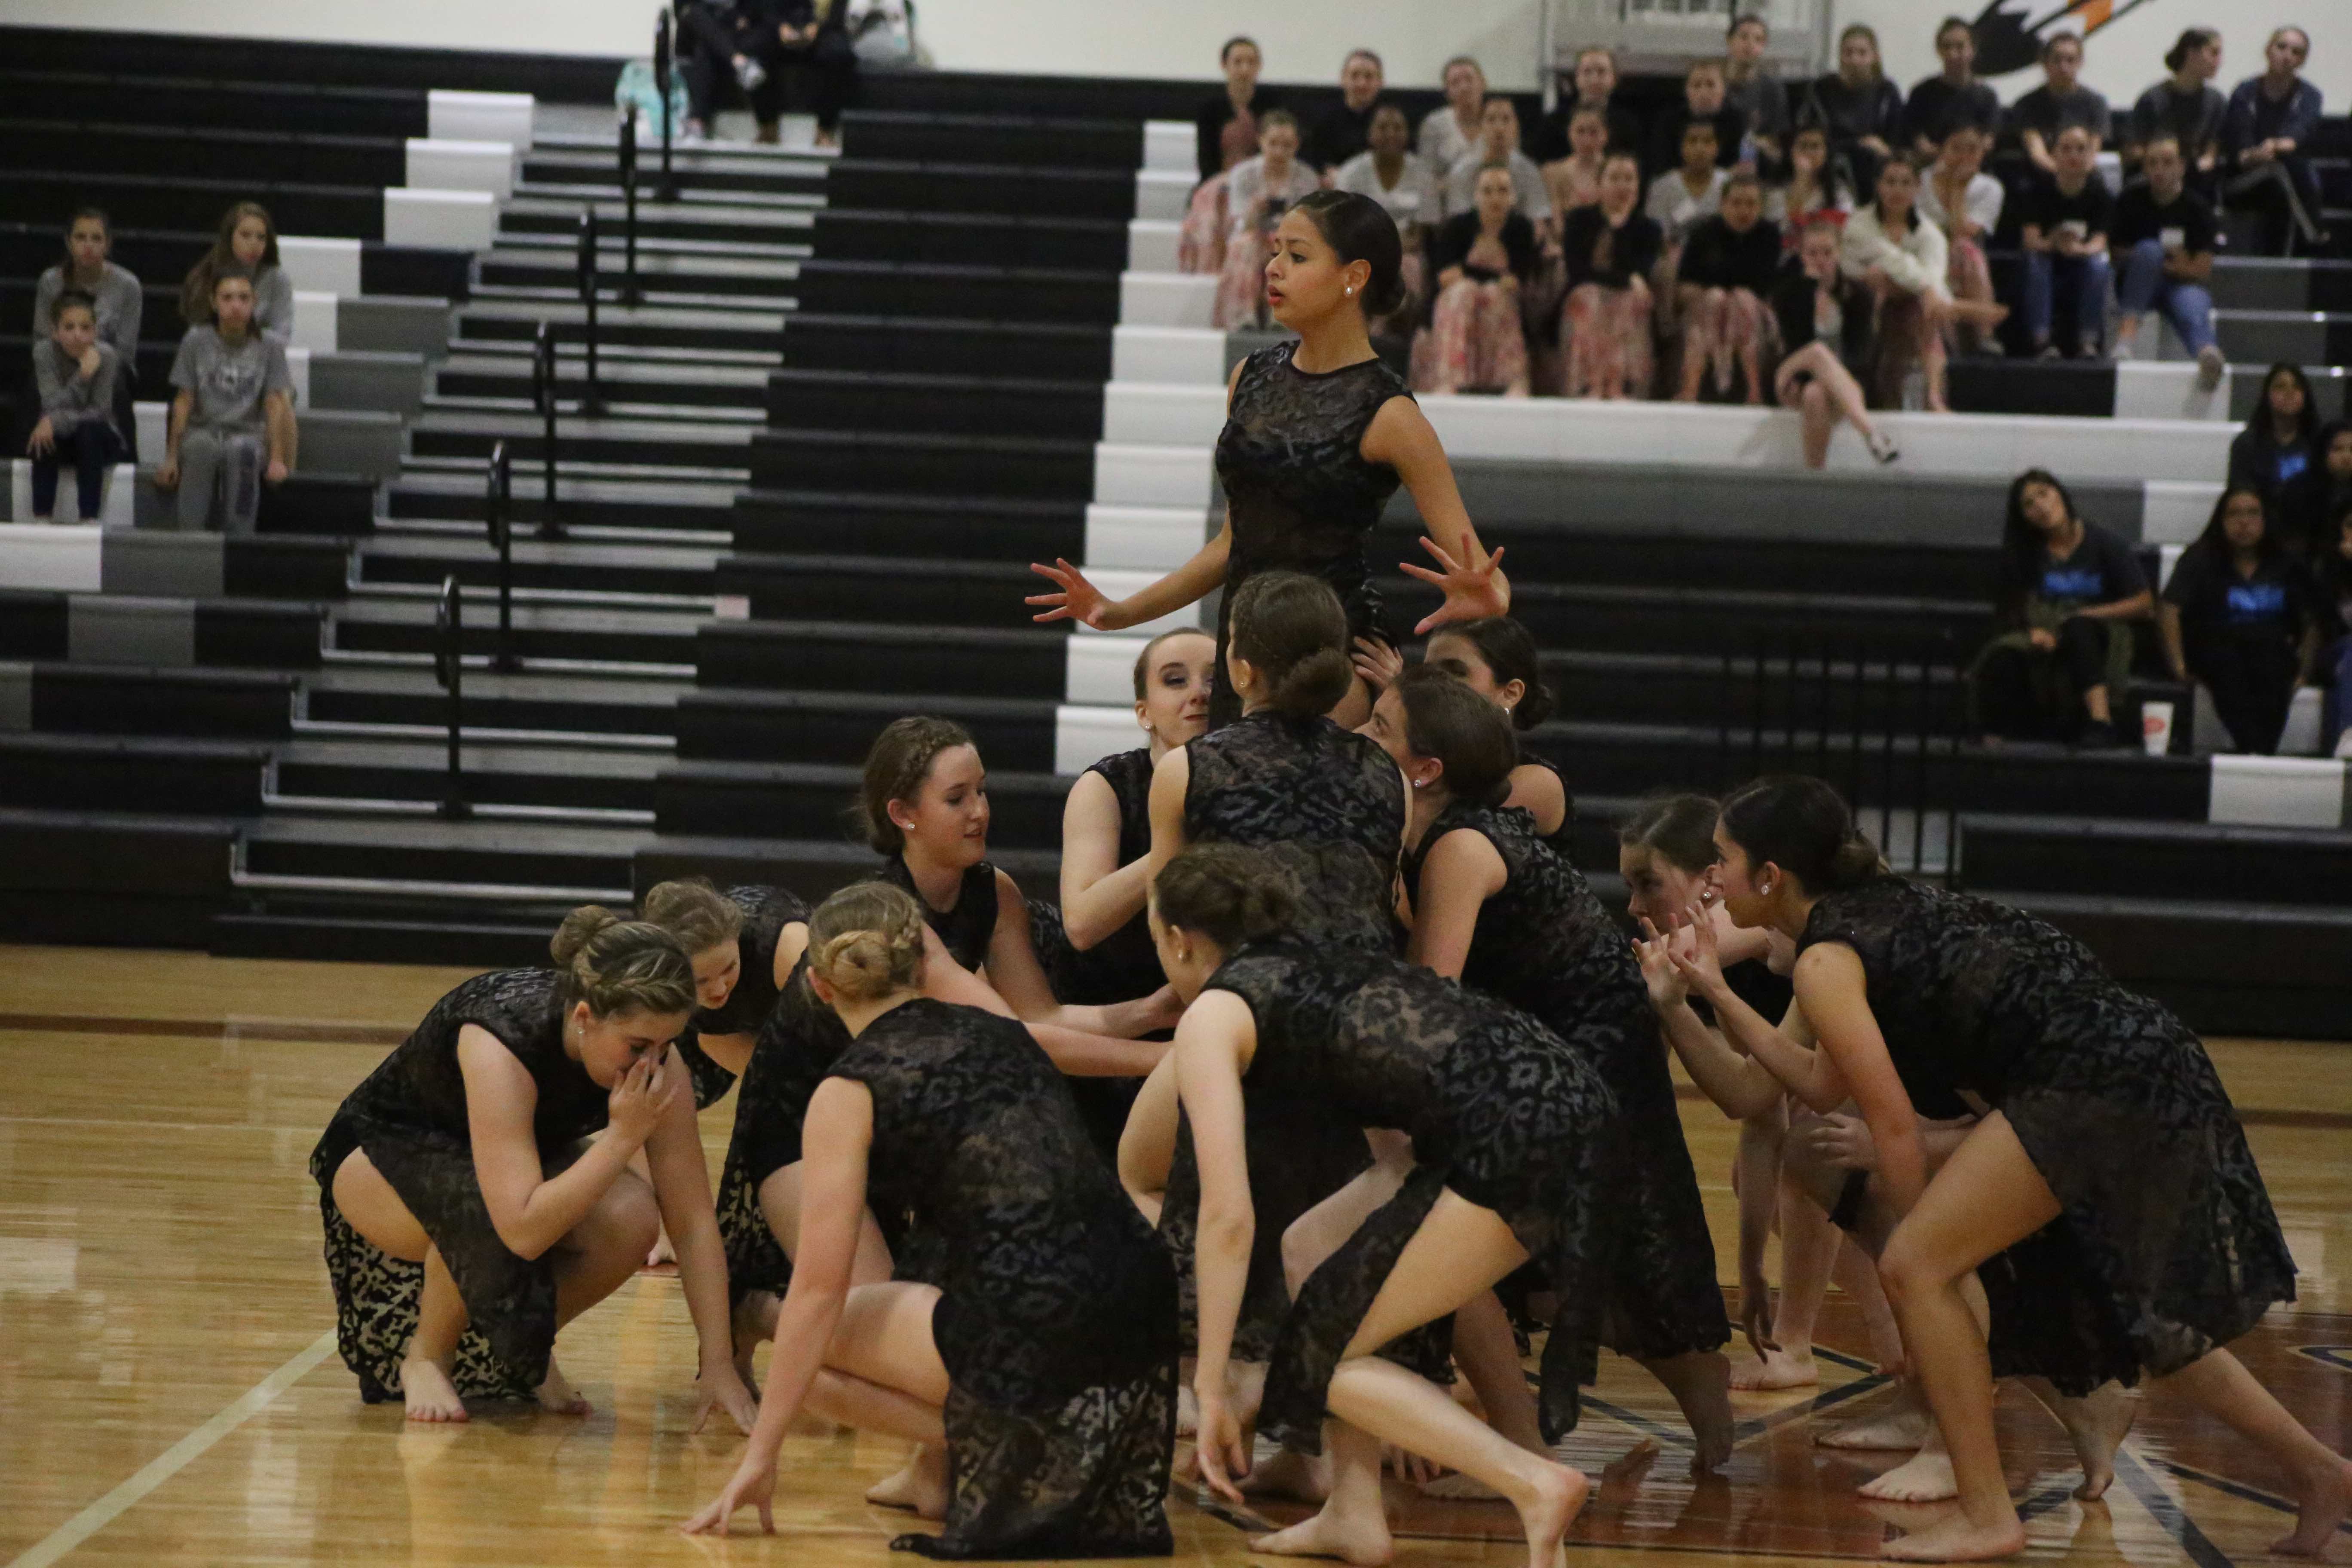 Dancers+Compete+at+Annual+Westwood+Dance+Classic